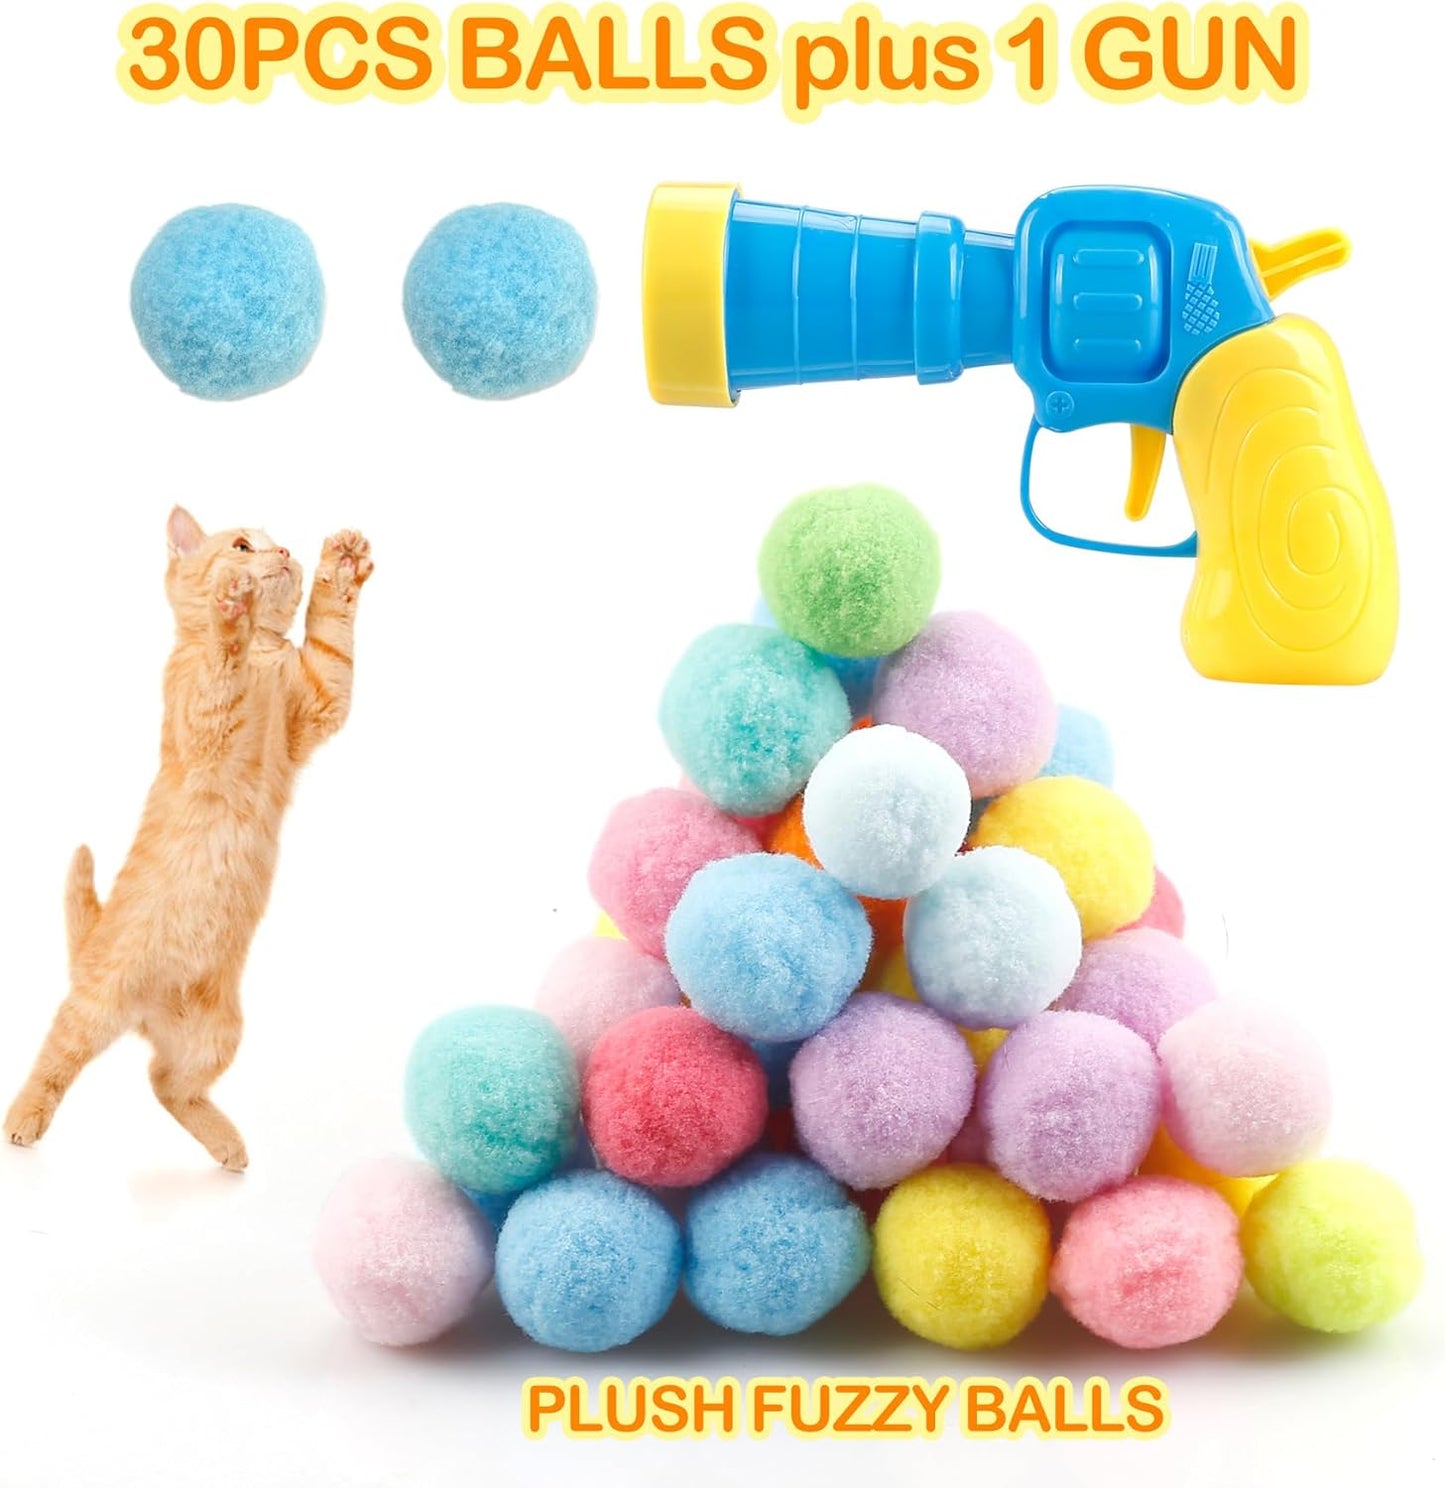 31Pcs Cat Ball Toy Launcher Gun, Cat Balls Fetch Toy, 30Pcs Plush Fuzzy Balls Launcher Cat Toy for Cats with 1 Gun, Funny Interactive Cat Toys for Bored Indoor Adult Cats, Cute Kitten Kitty Toys